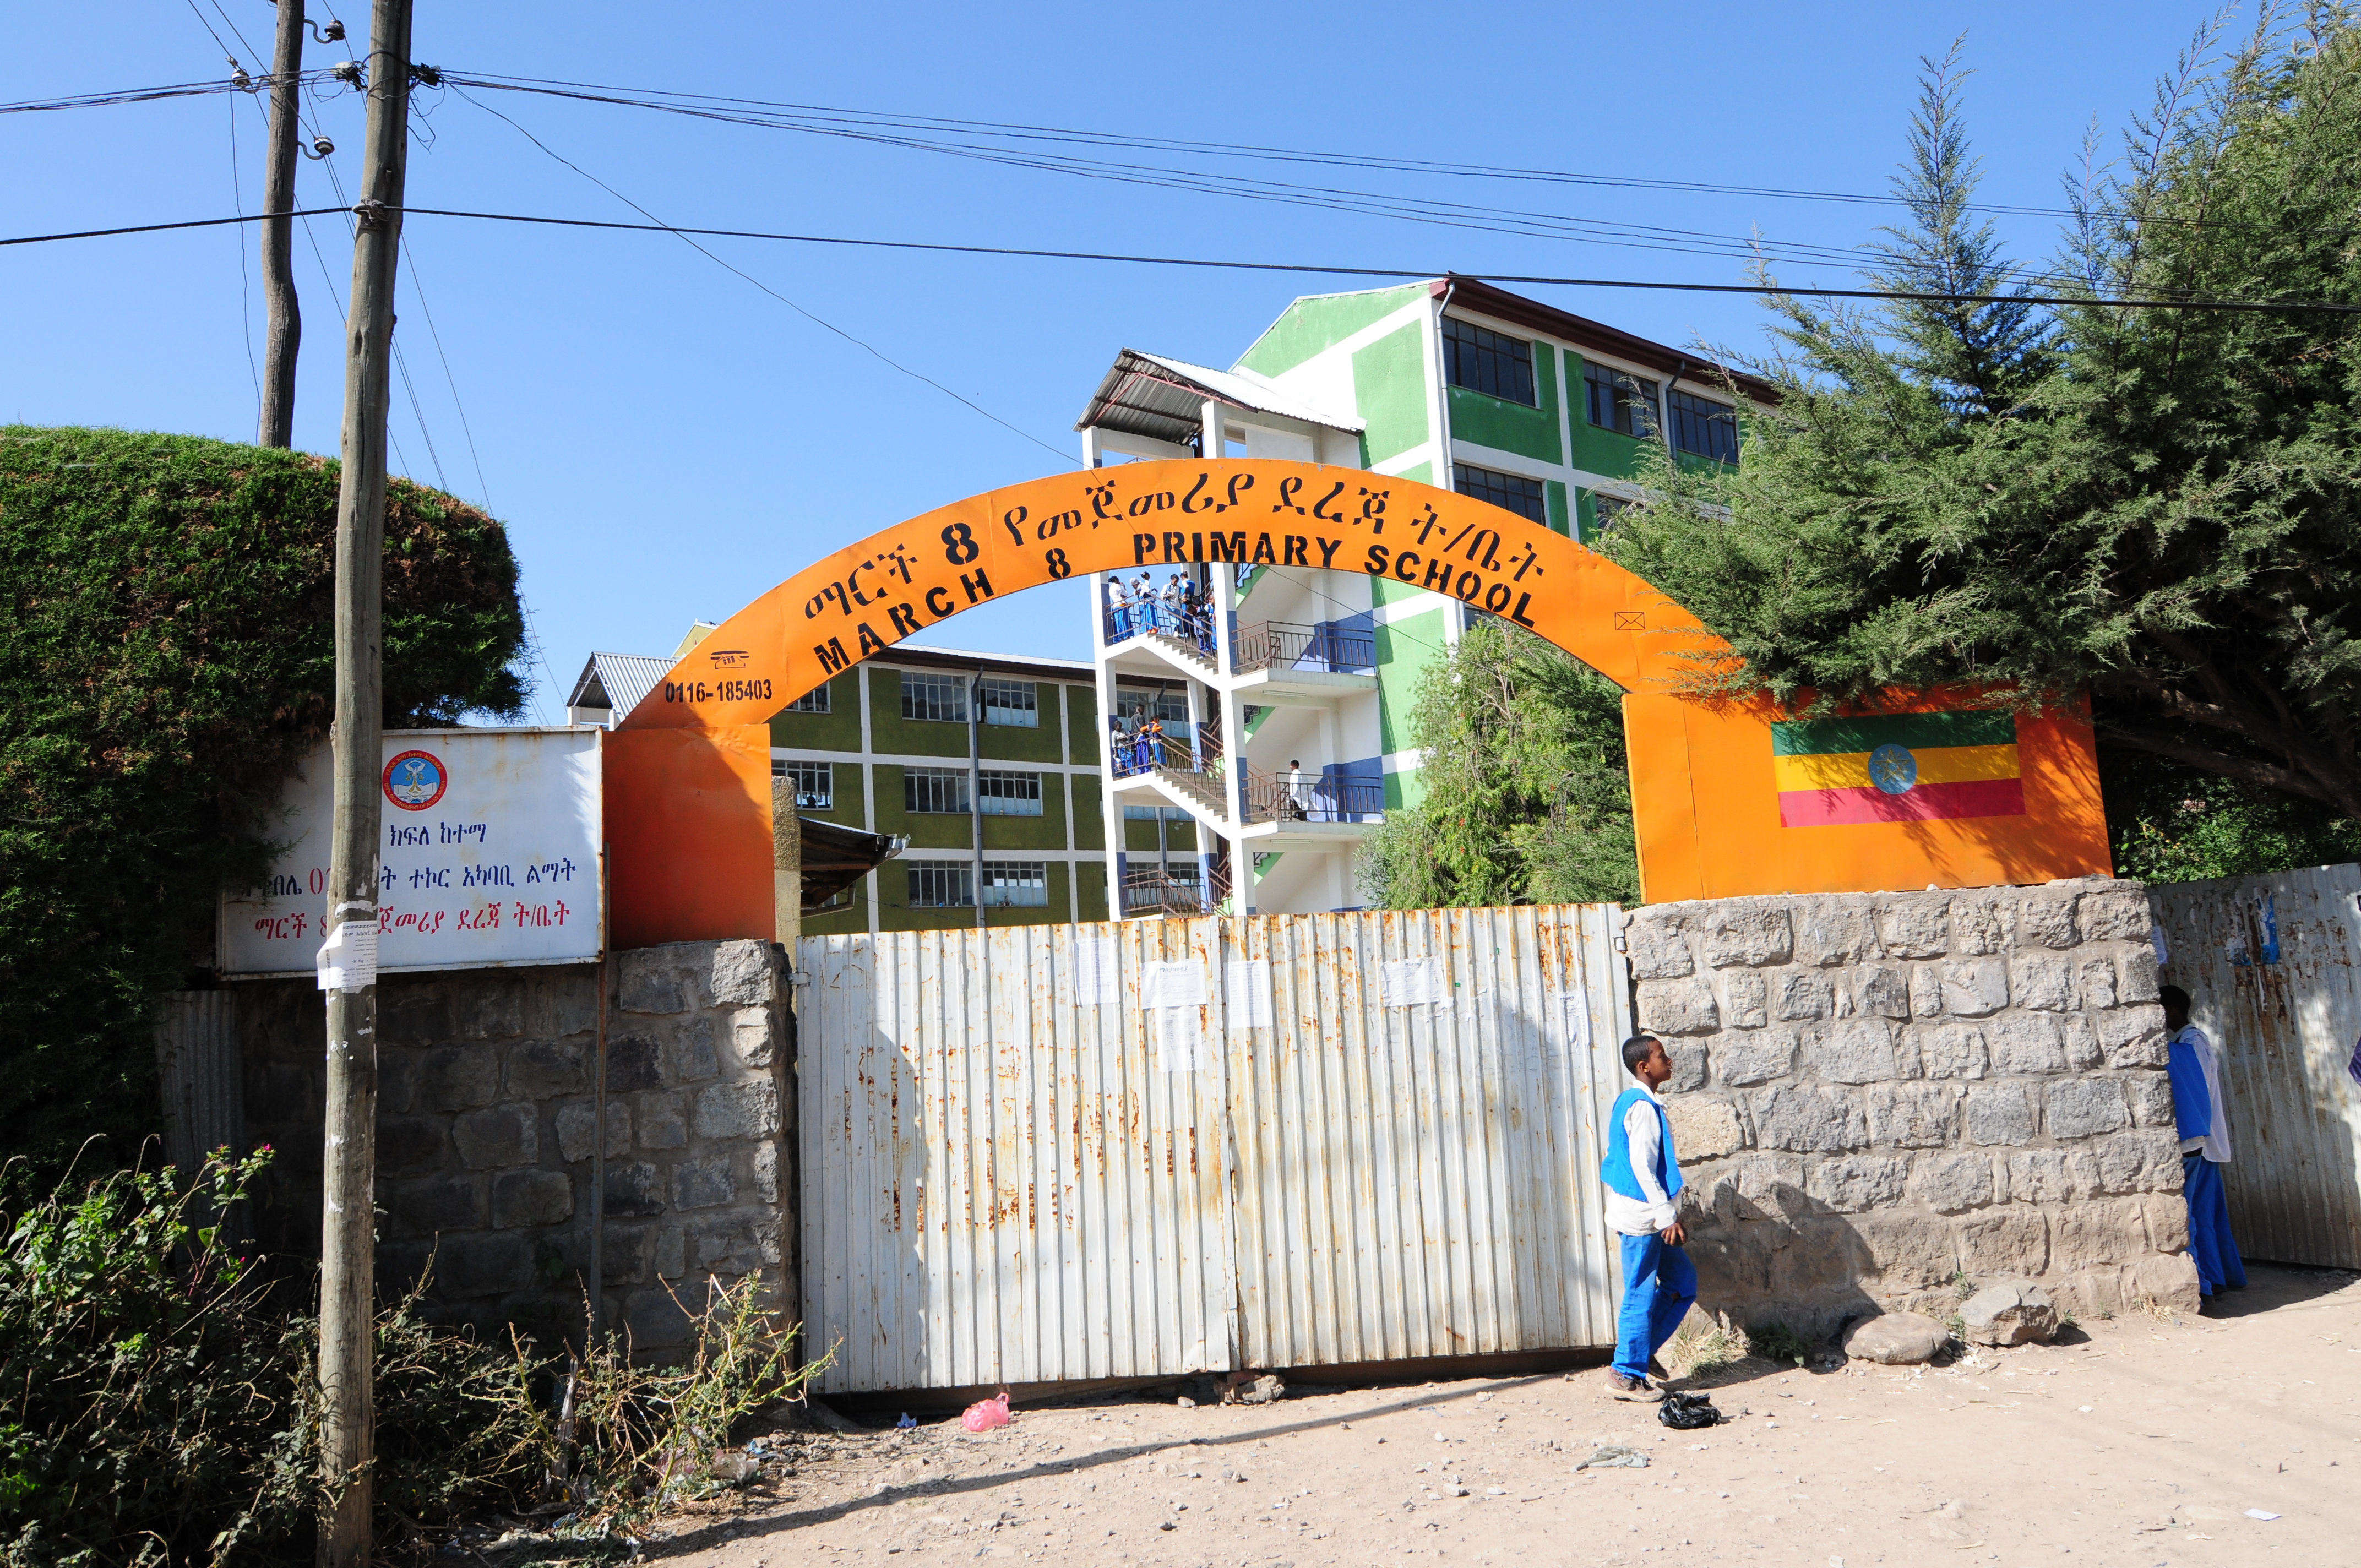 The front gate of a school in Addis Ababa